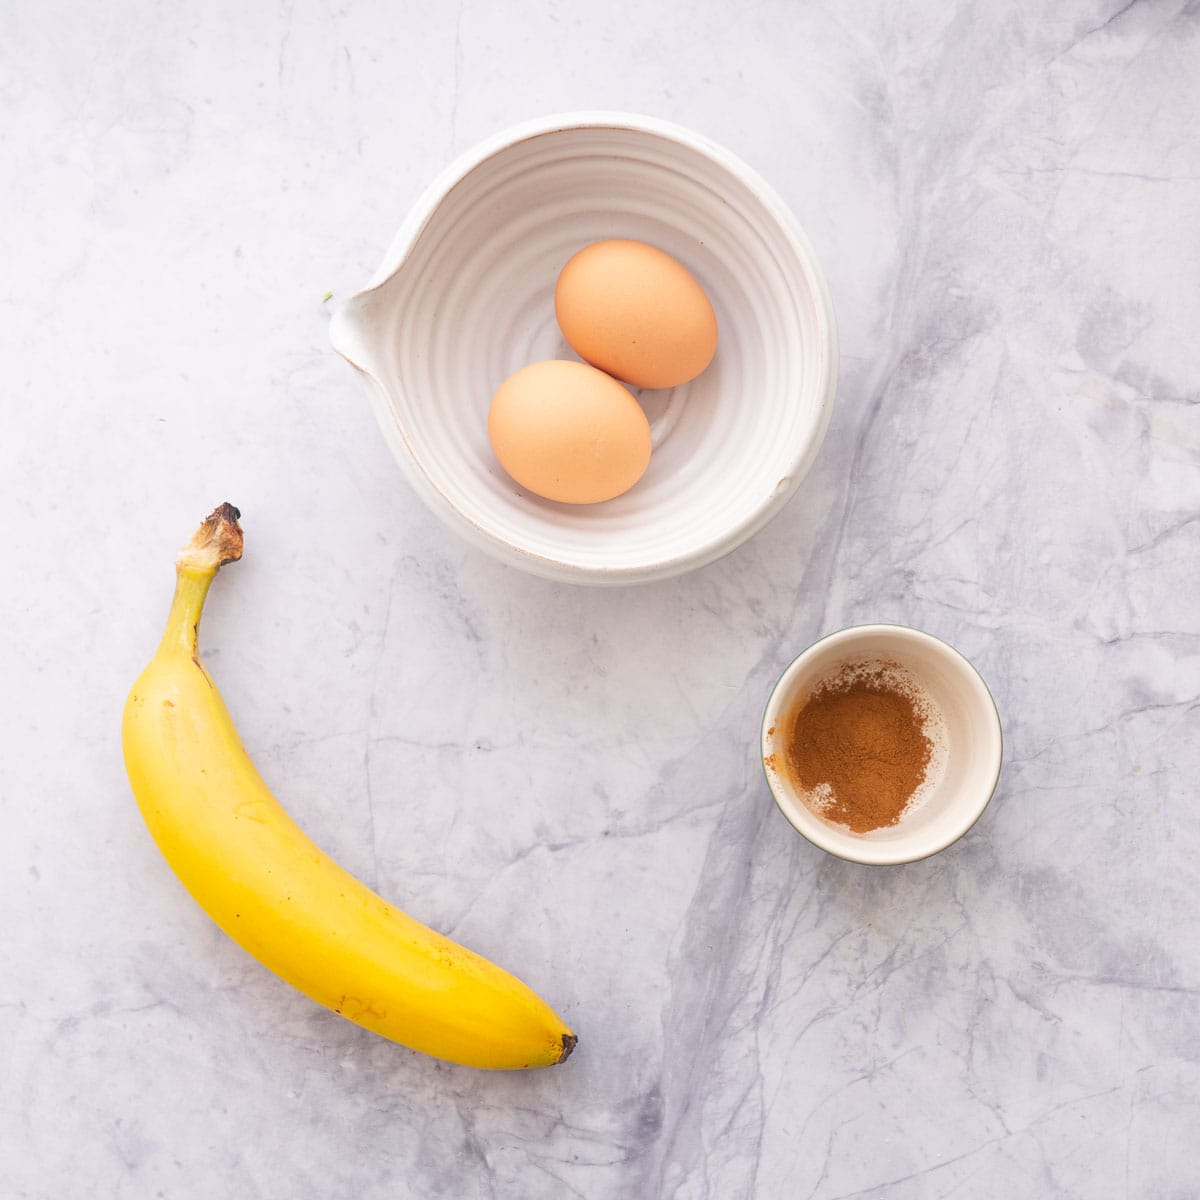 eggs, banana and a small dish of cinnamon on a marble bench top.